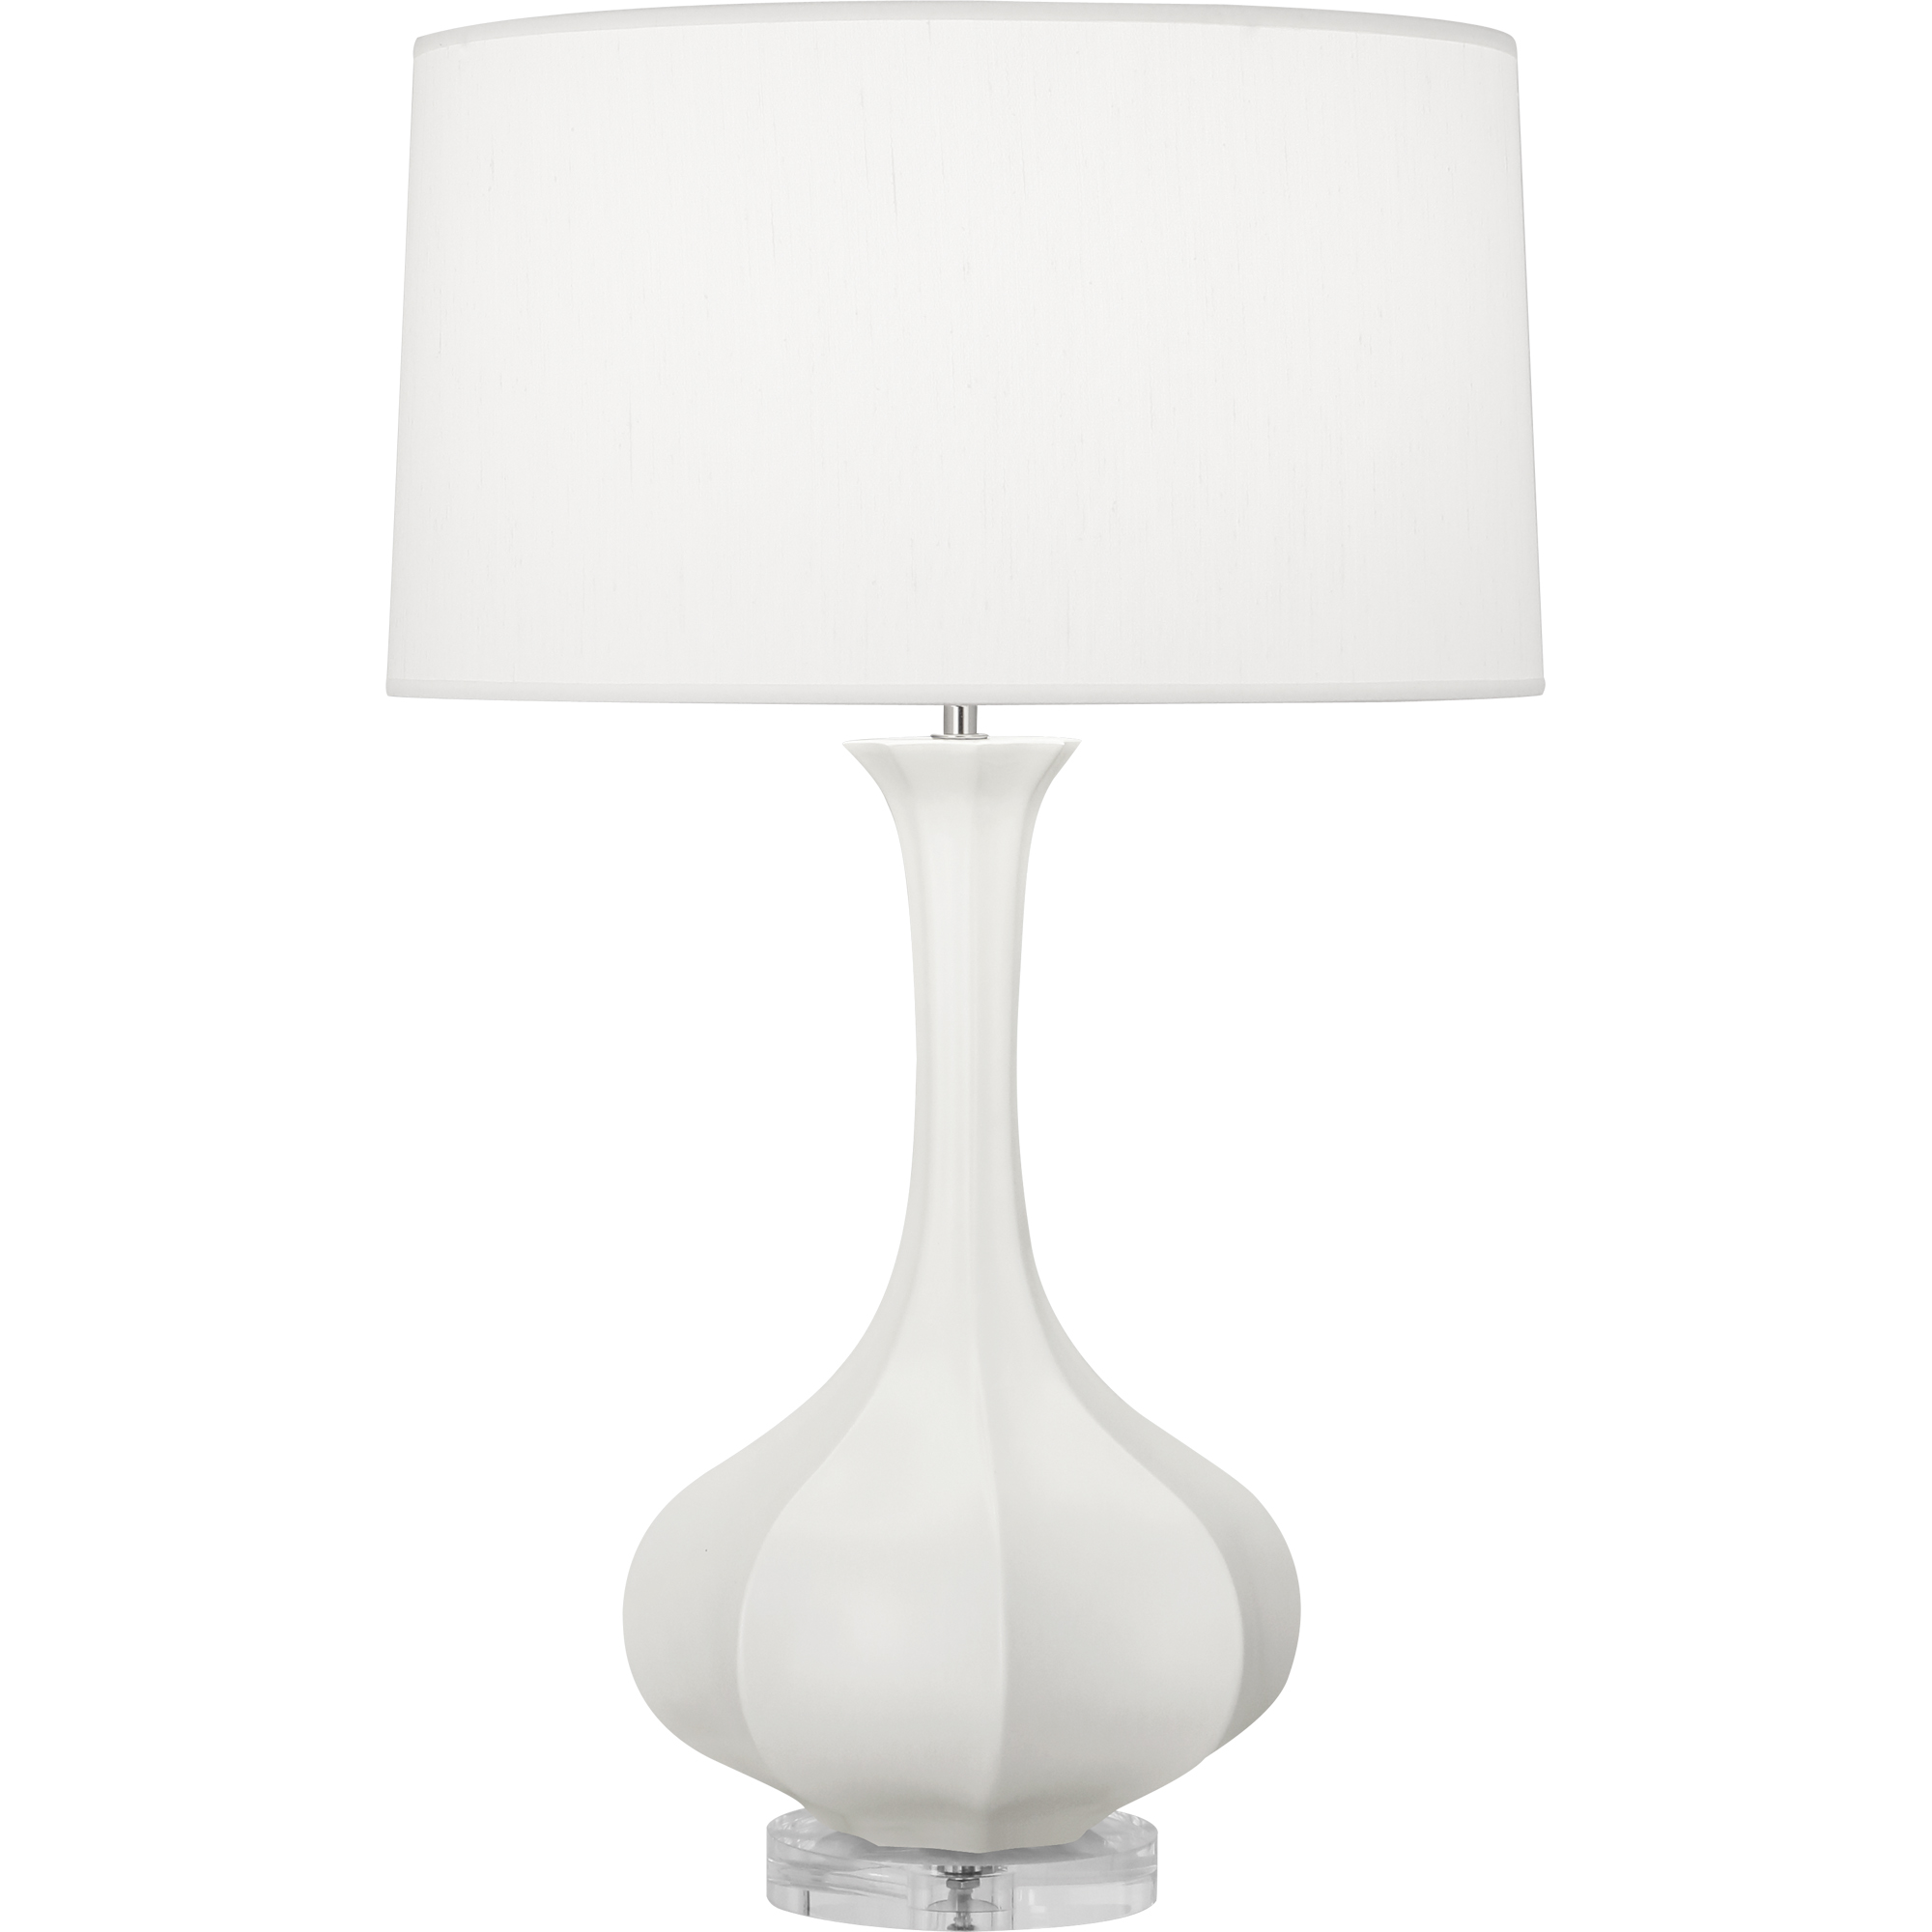 Pike Table Lamp Style #MLY96